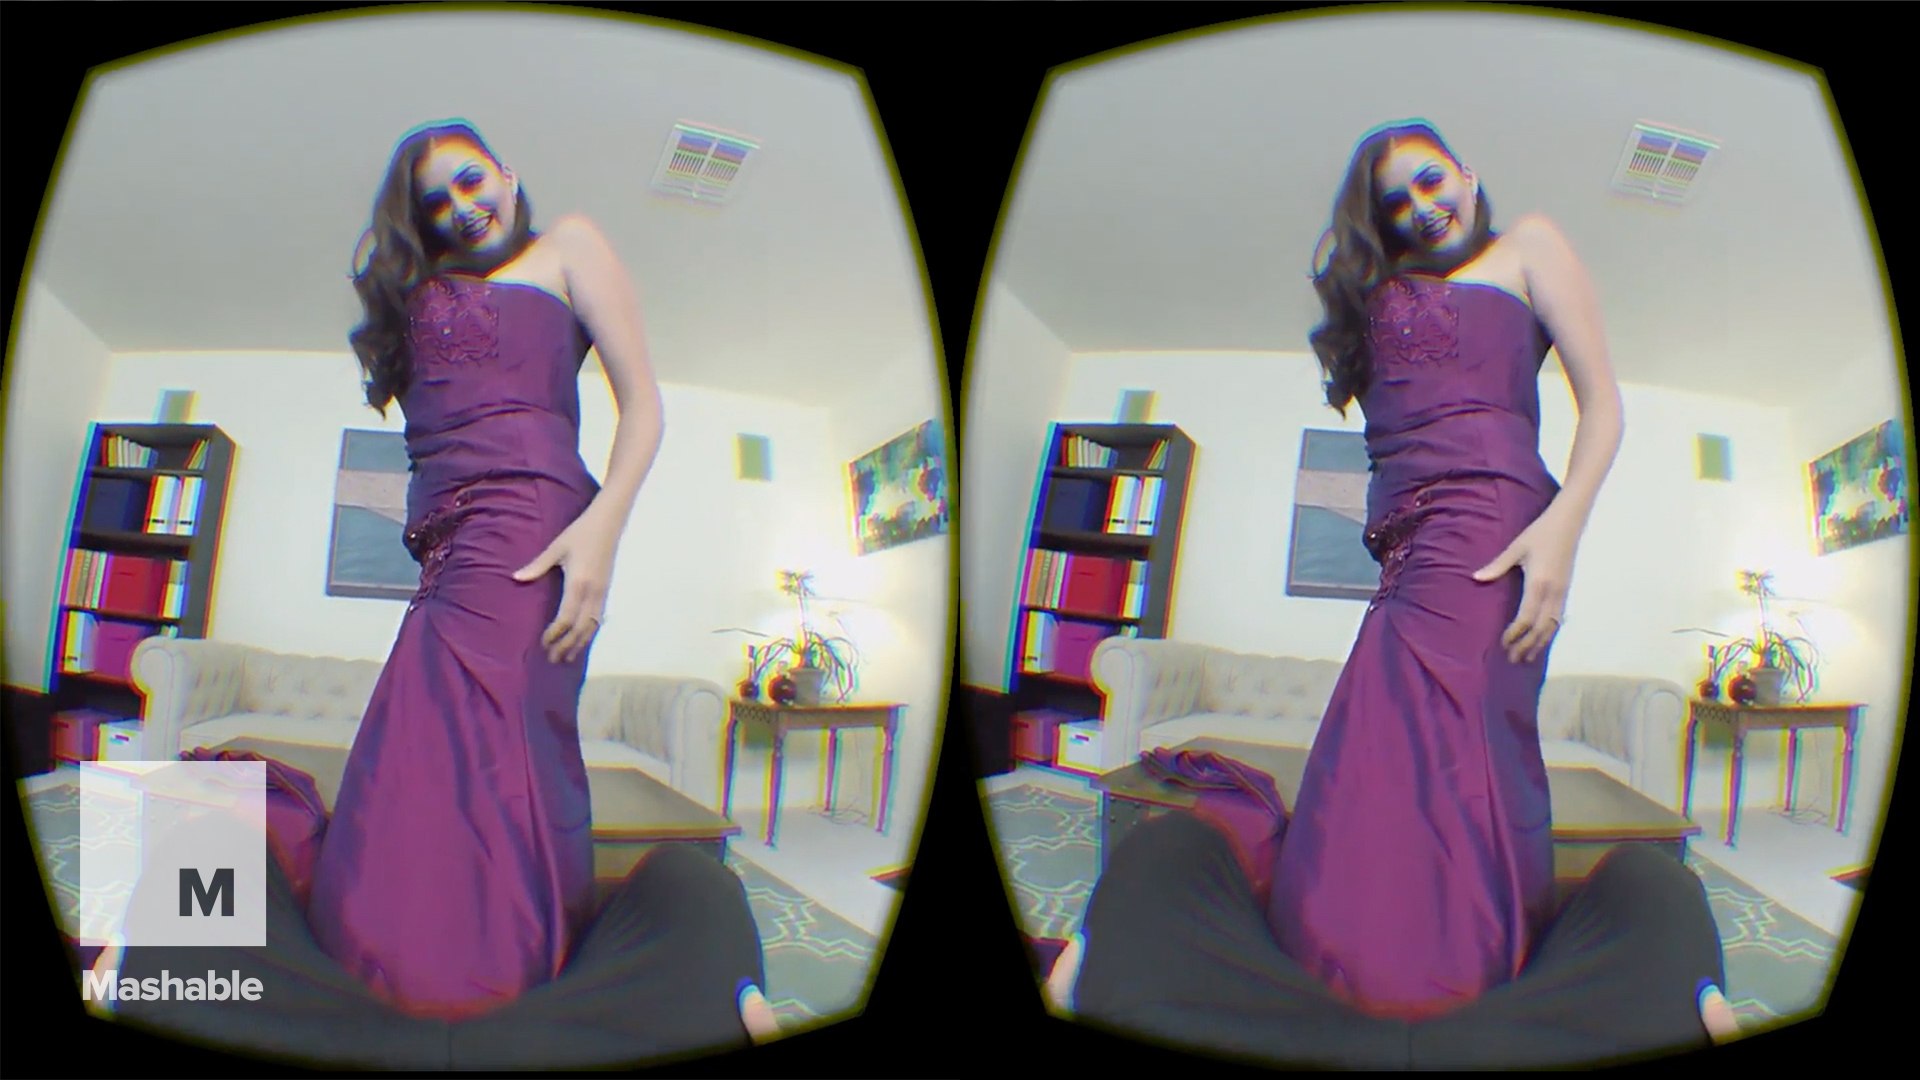 Tech reporter tries VR porn, may never be the same again - video Dailymotion